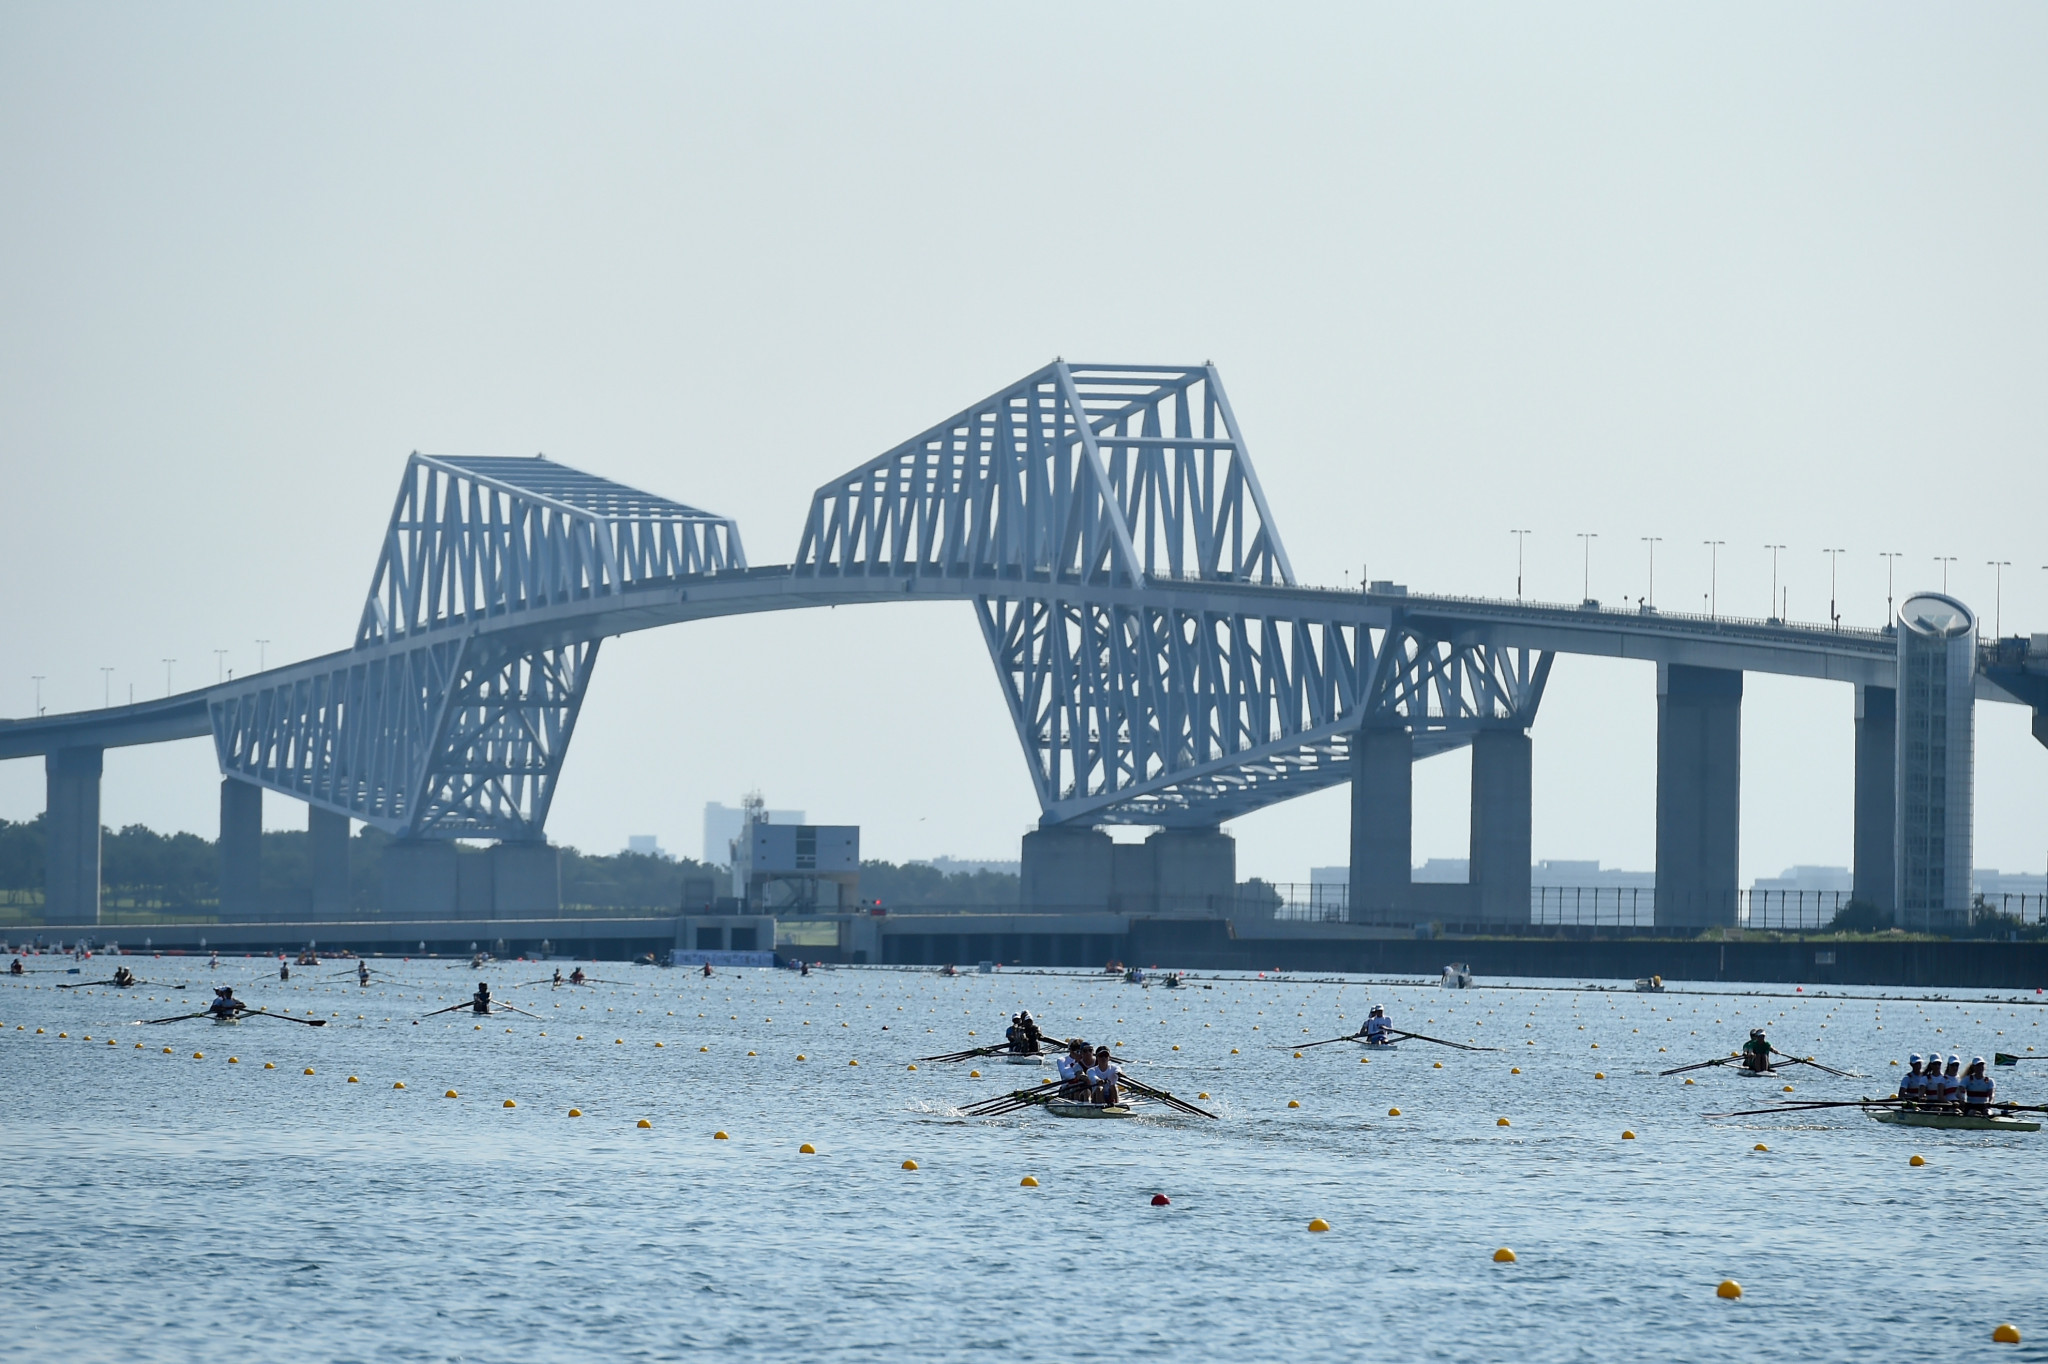 Tokyo 2020 rowing venue to open for non-sport use